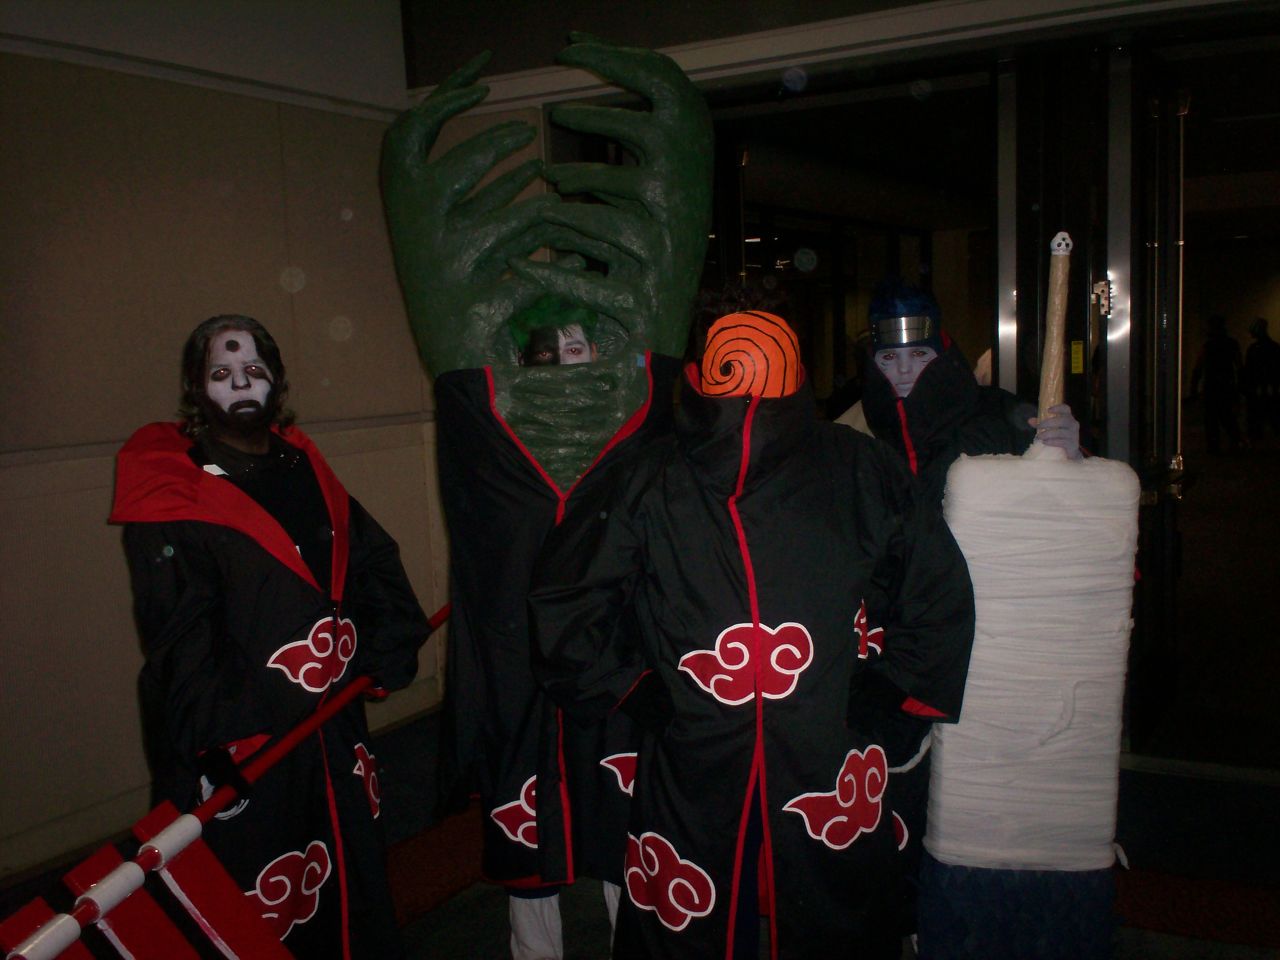 three people dressed in costume pose together for a po